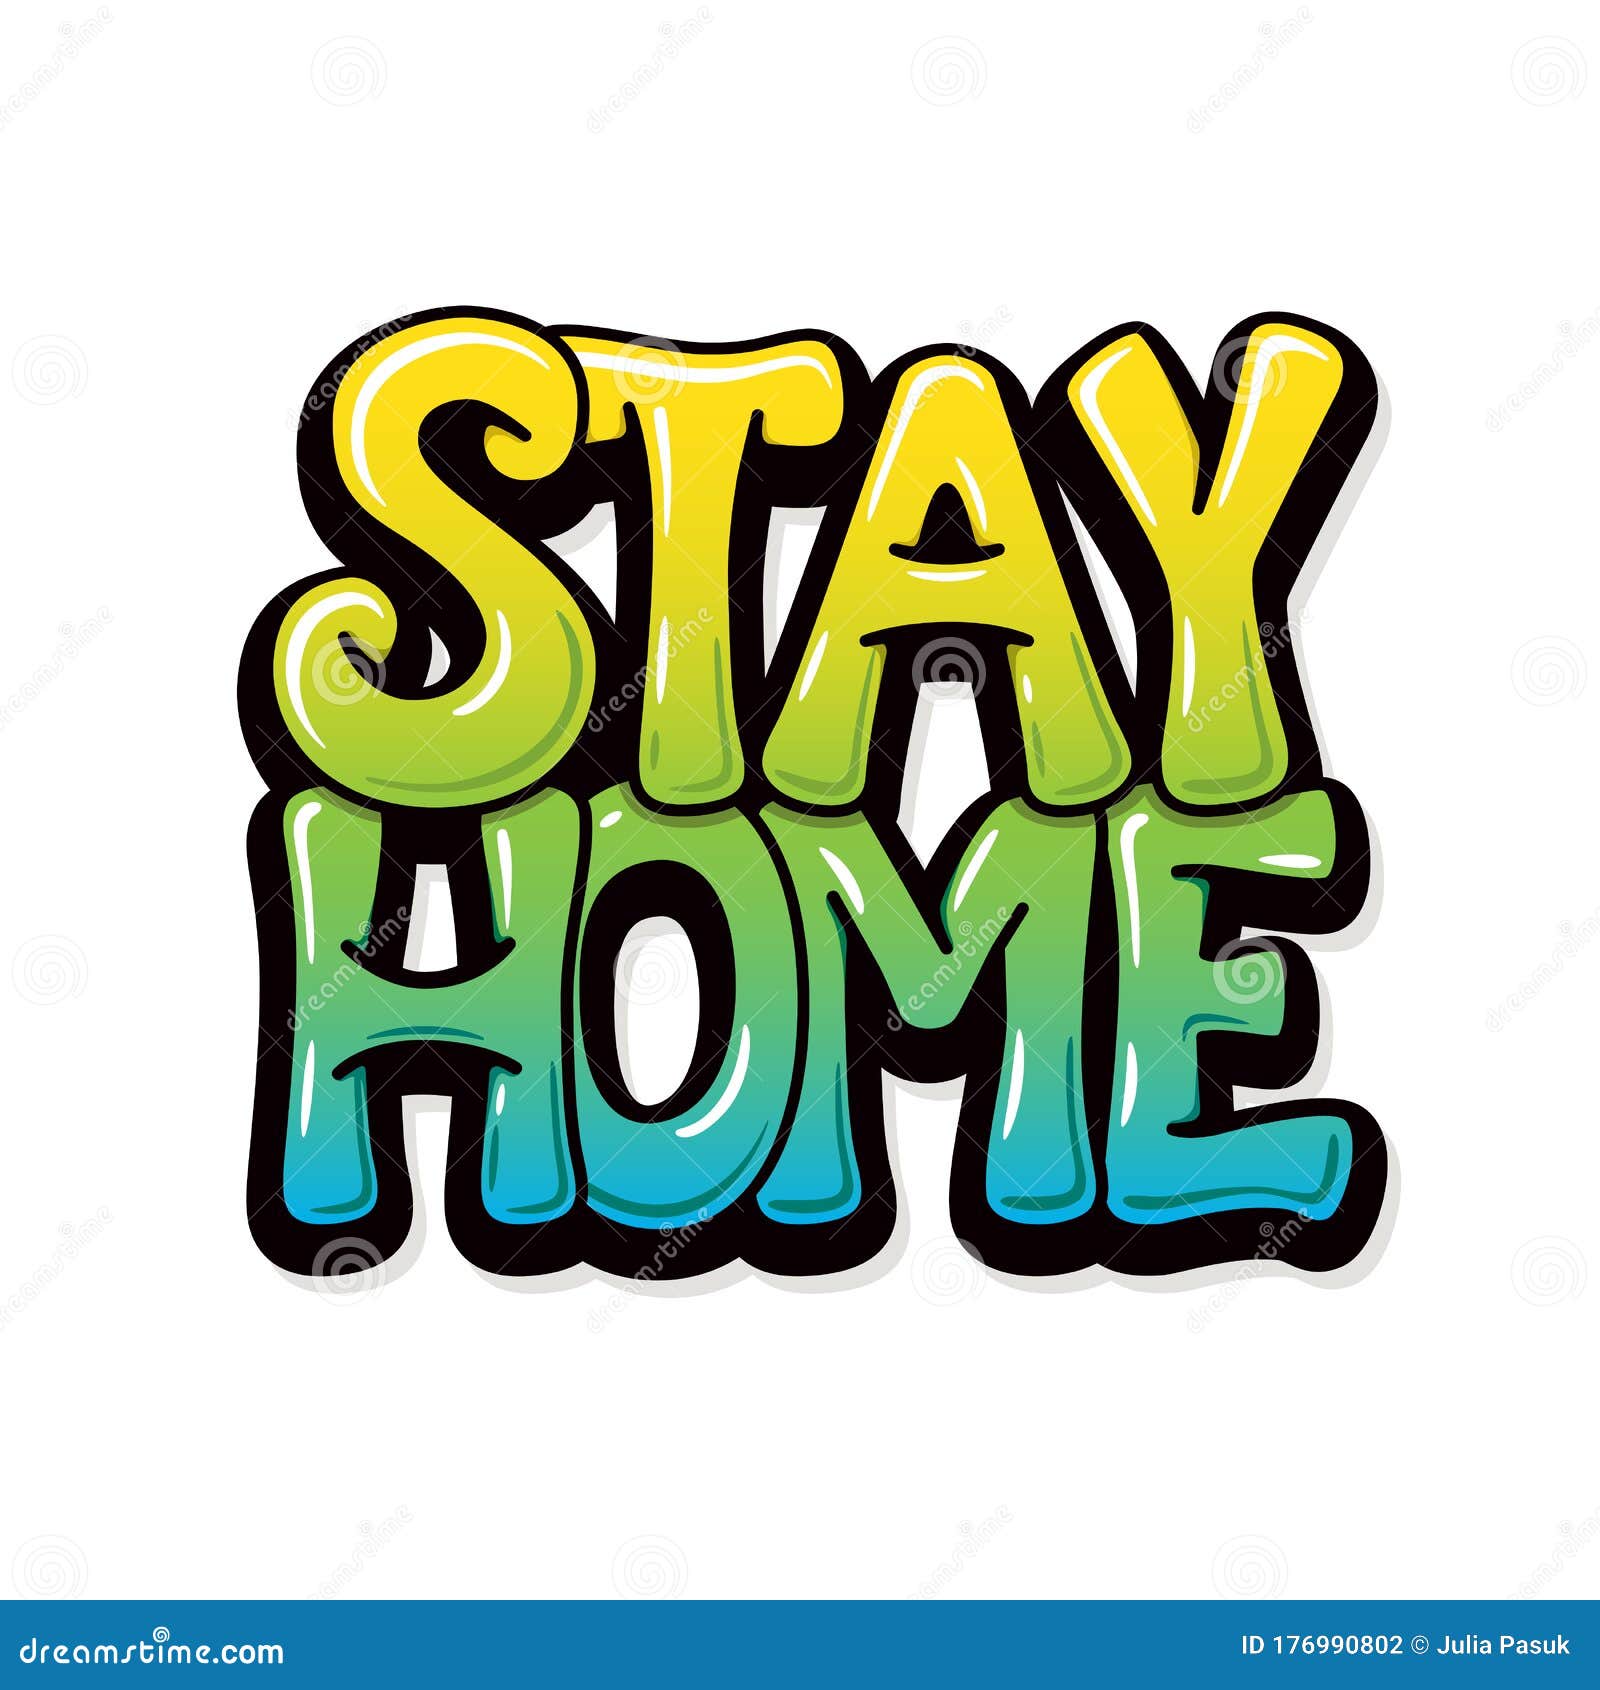 Stay Home Graffiti Design For Banners Posters Cards Bubble Font Vector Stock Vector Illustration Of Pandemic Covid19